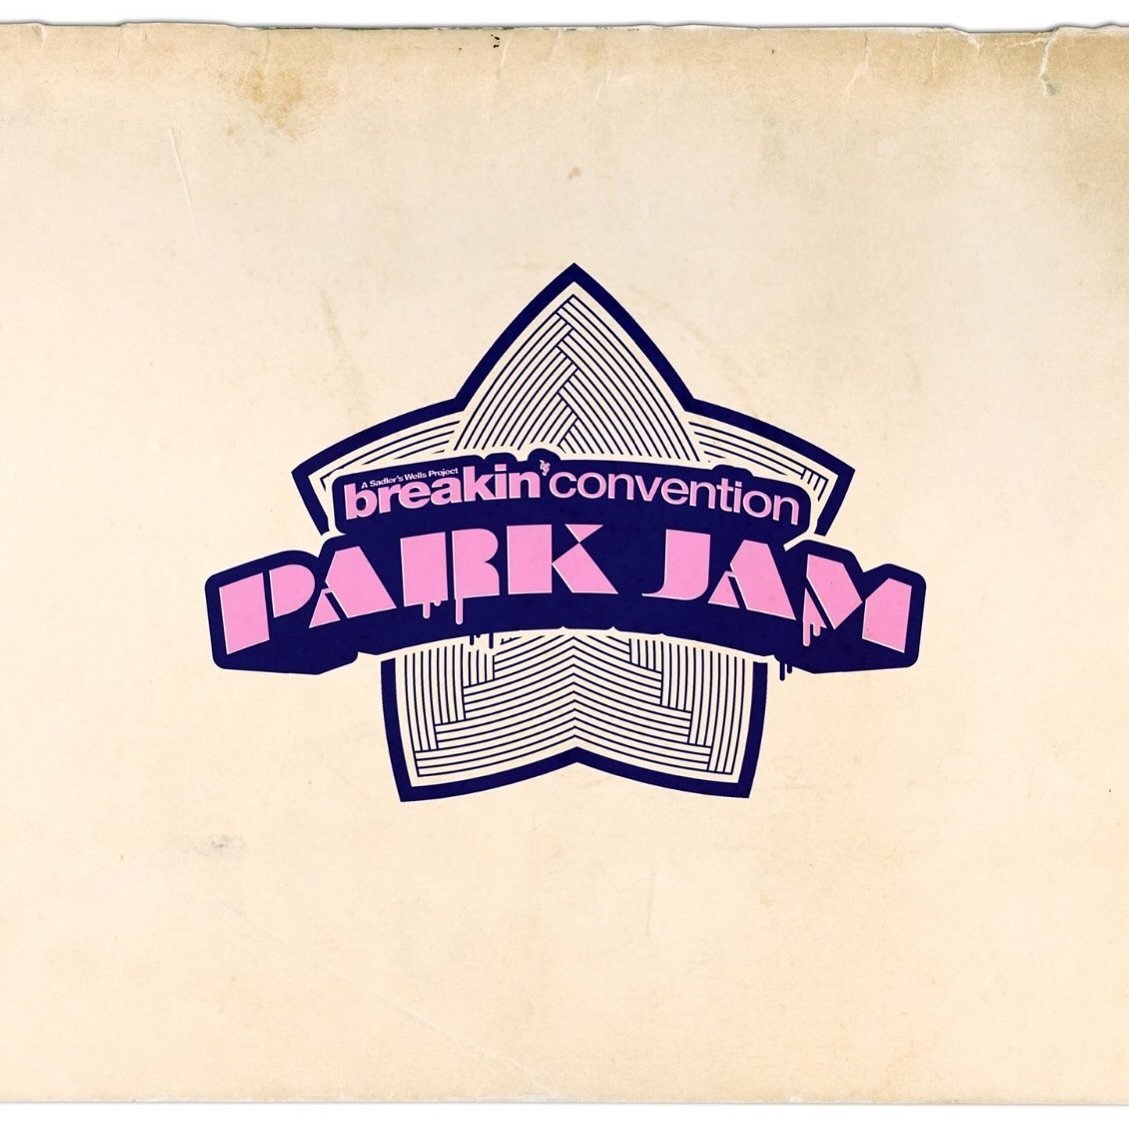 IMPORTANT UPDATE!
Due to inclement weather the Breakin&rsquo; Convention annual Park Jam event has been cancelled today. We apologise for any inconvenience caused but would like to thank all who have made this year&rsquo;s festival a success.

Peace 